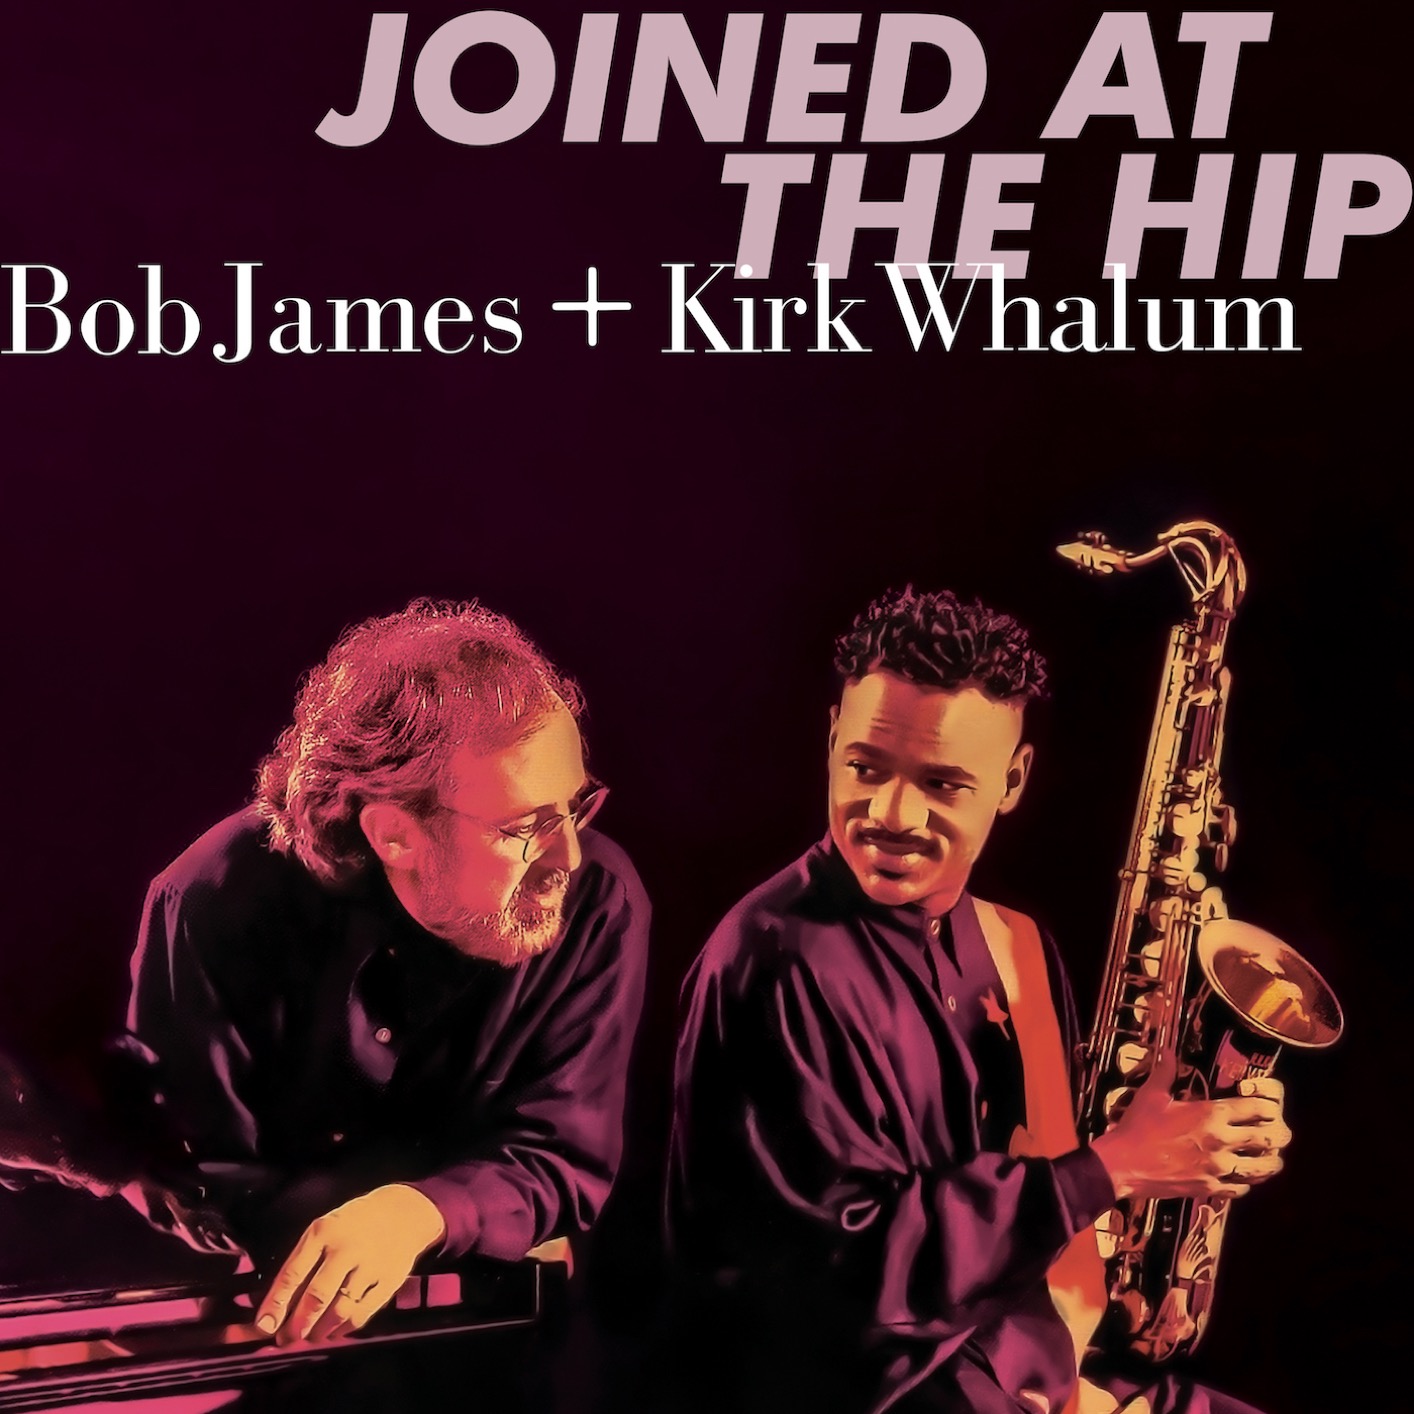 Bob James & Kirk Whalum – Joined At The Hip (Remastered) (2006/2019) [FLAC 24bit/44,1kHz]